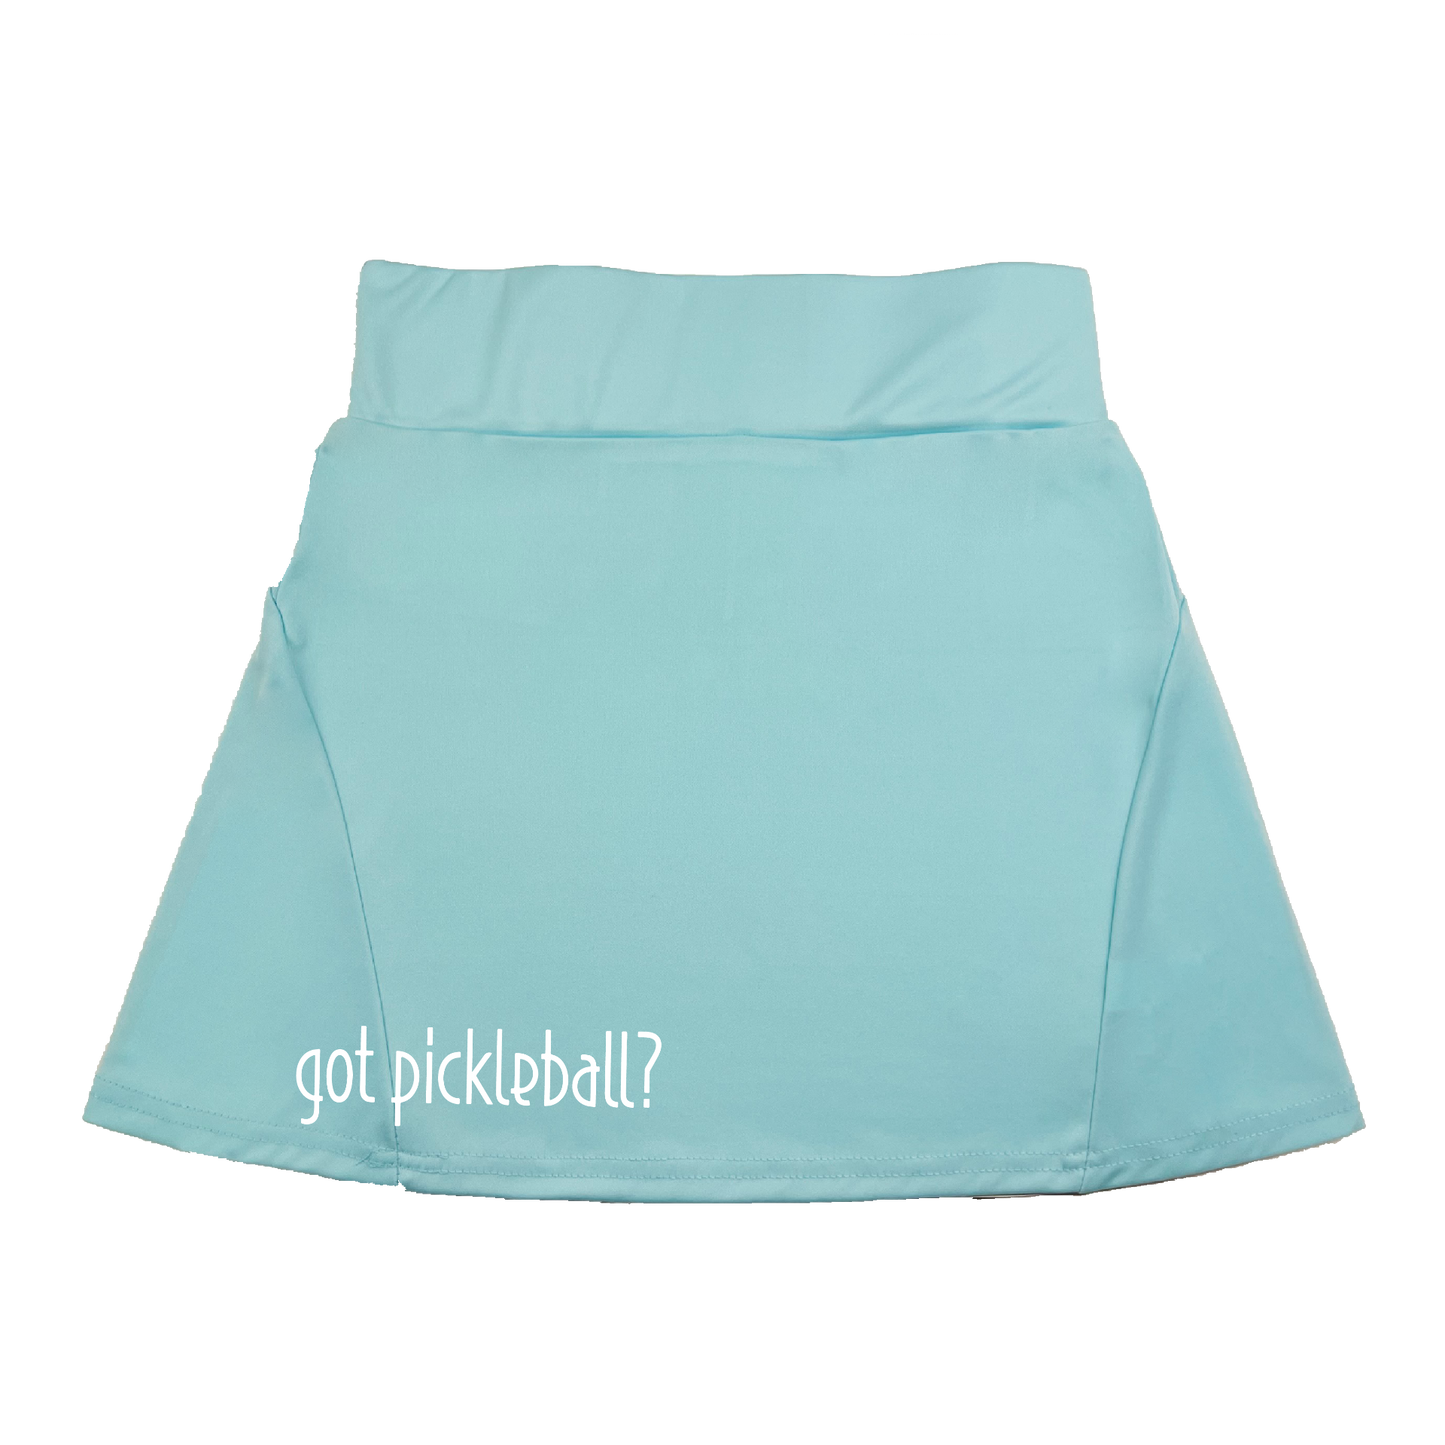 Pickleball Flirty Skort Design:  got pickleball   These flirty skorts have a flat mid-rise waistband with a 3 inch waistband.  Light weight without being see through and the material wicks away moisture quickly.  Flirty pleats in the back with inner shorts for free movement and stylish coverage on the courts.  A functional zipper pocket on the back and two built in pockets on the shorts for convenient storage.